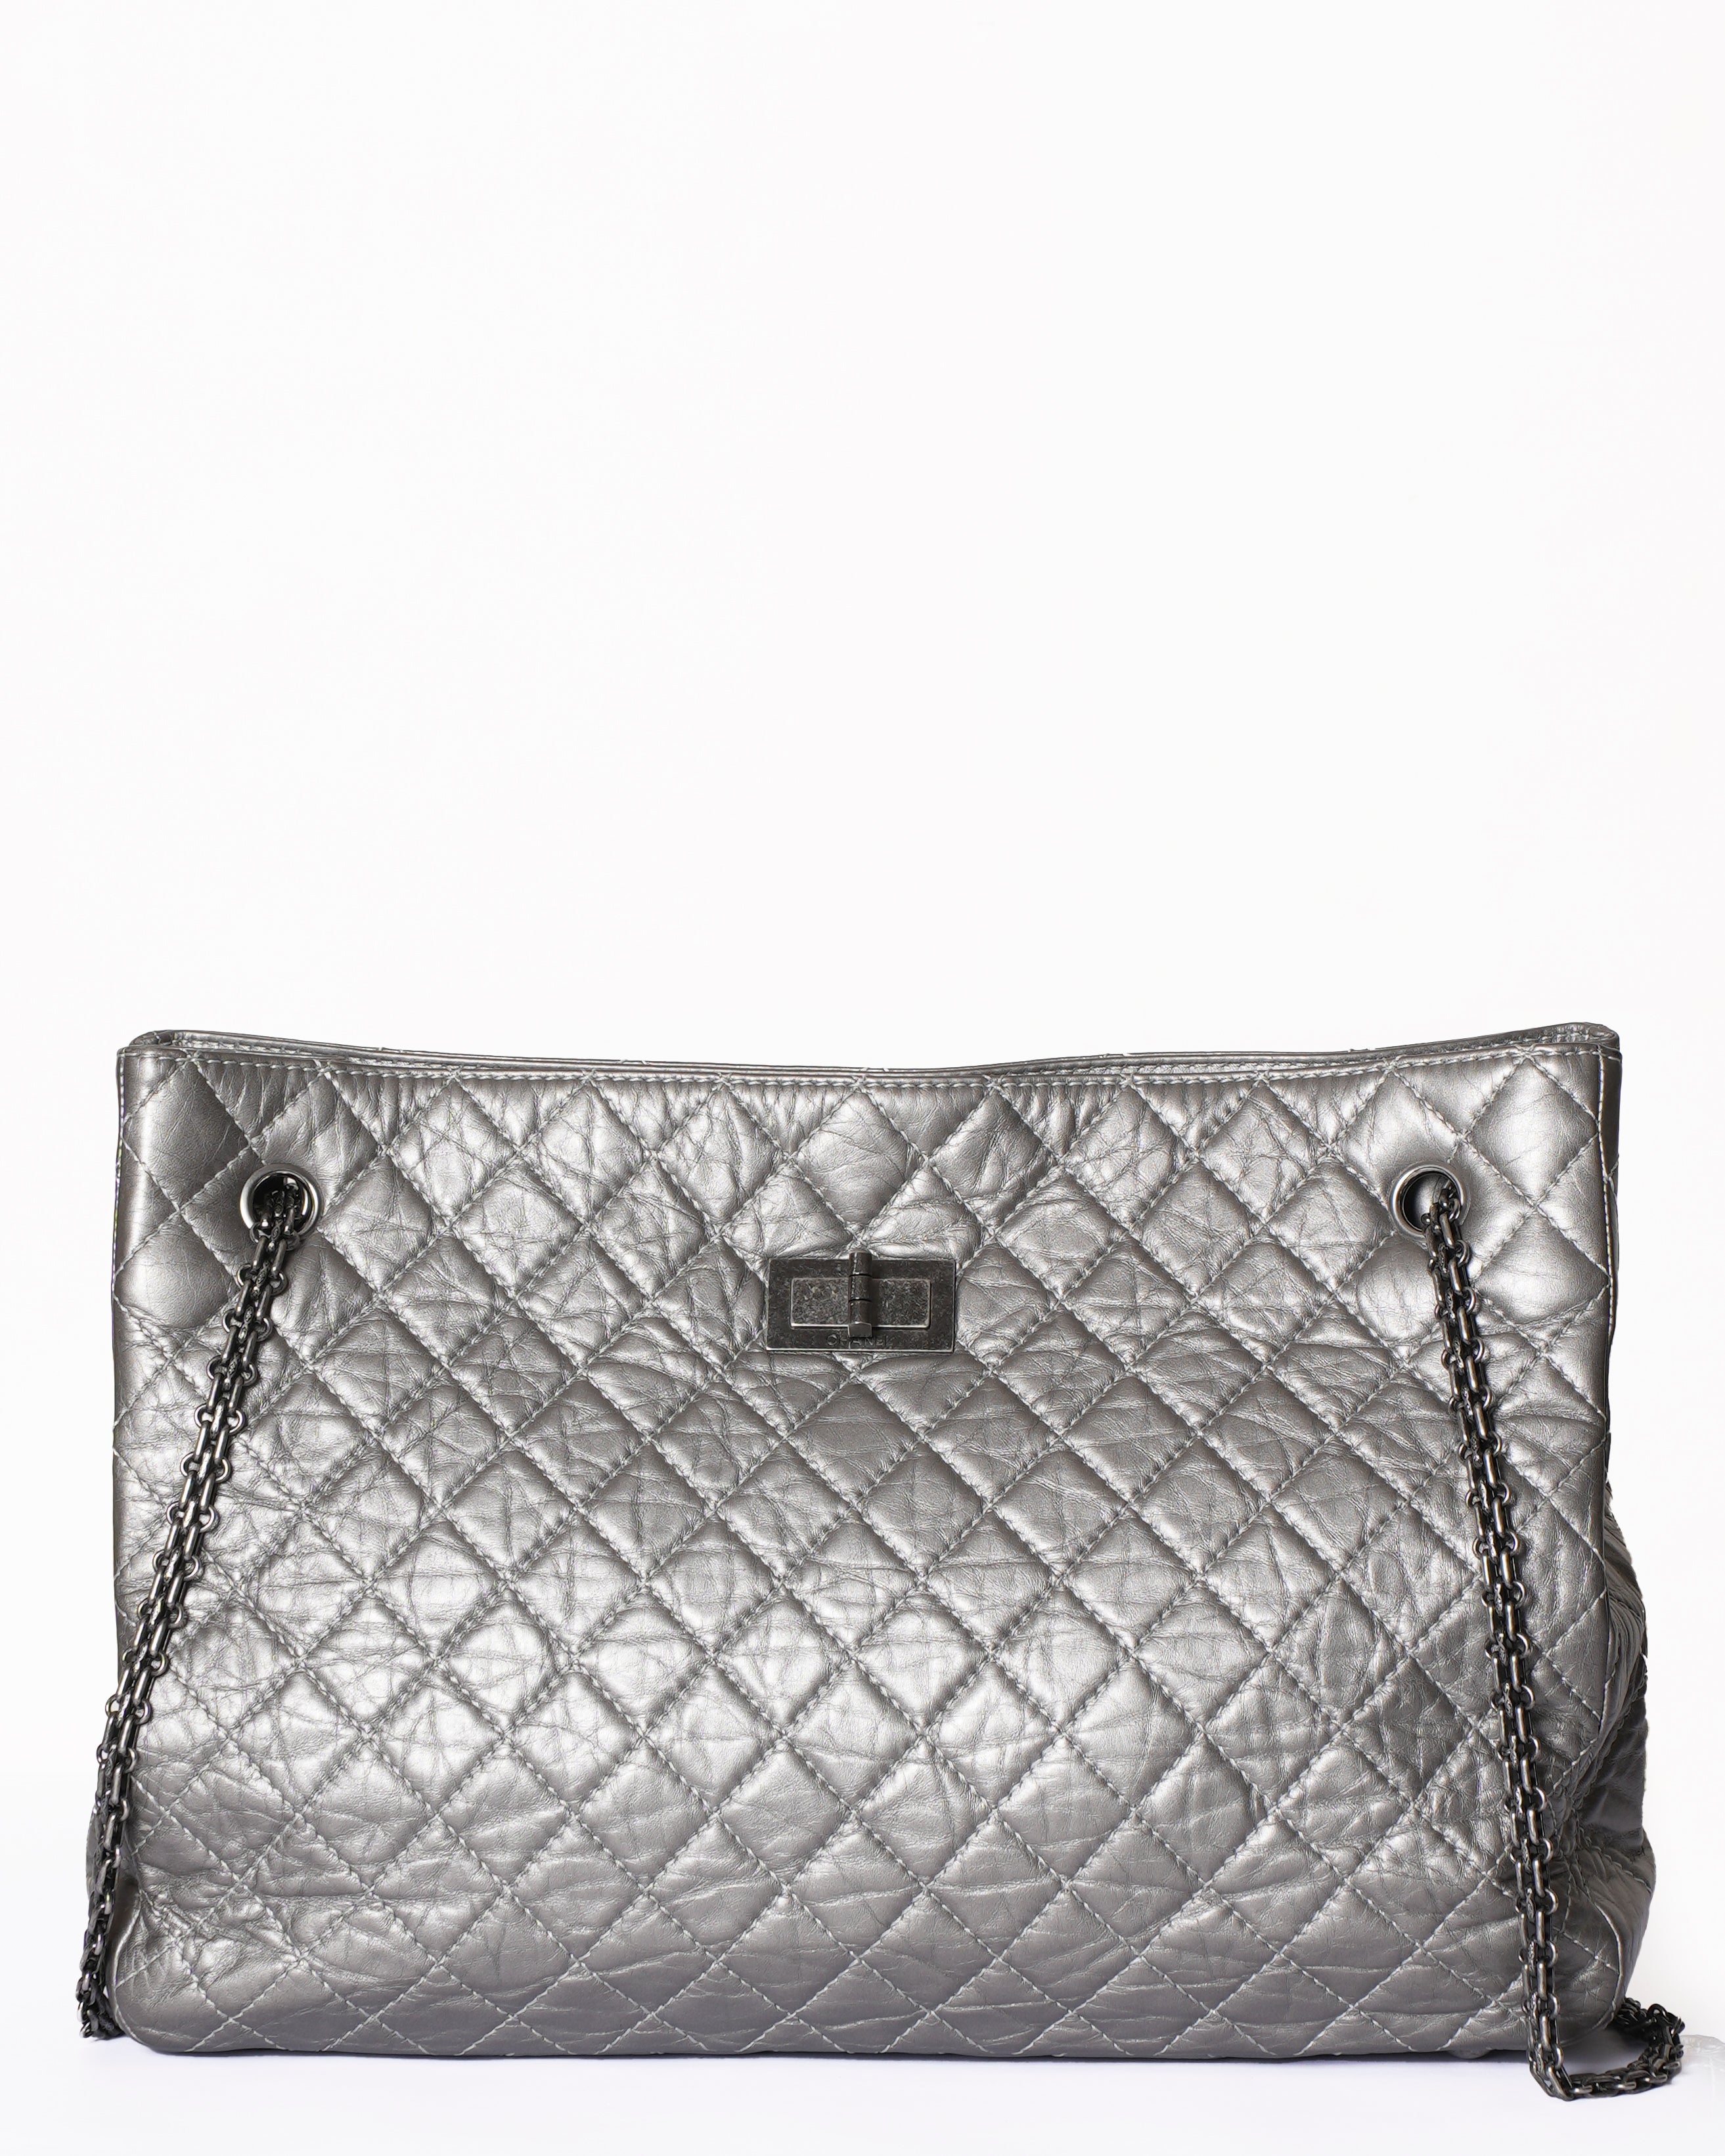 Chanel Limited Edition Reissue 2.5 Tote Quilted Aged Calfskin Bag